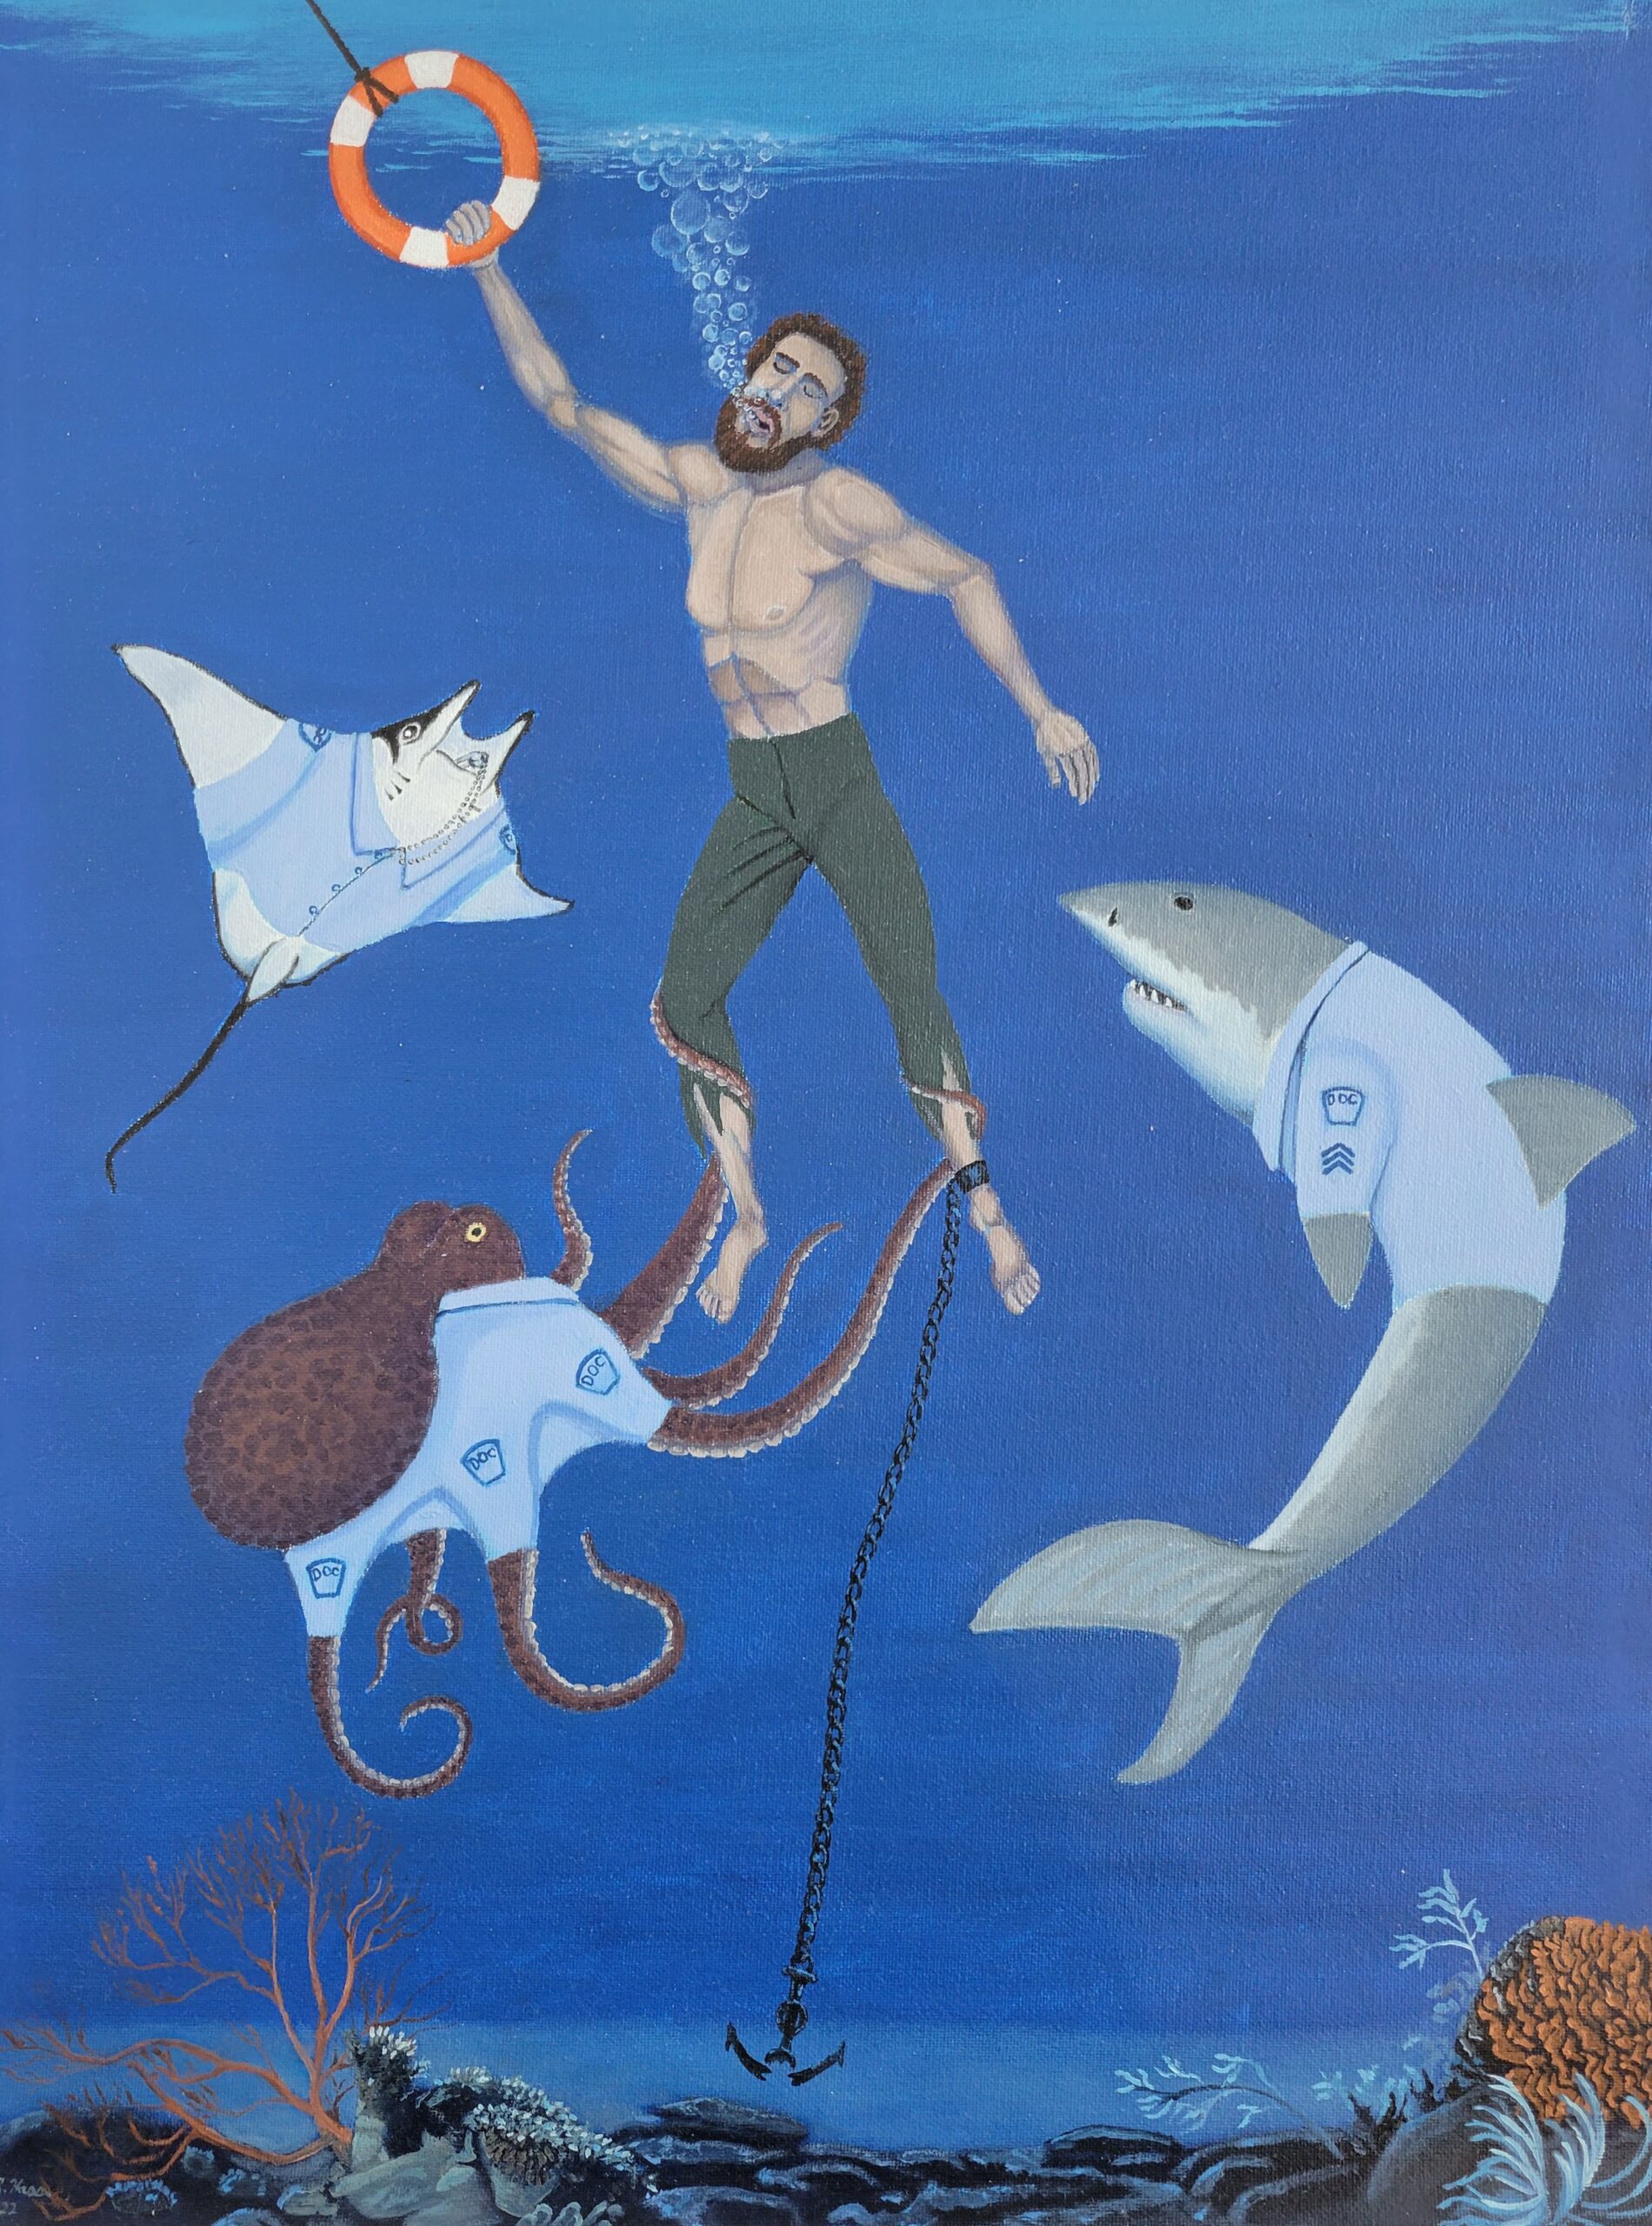 A painting of a man being held underwater by various sea creatures